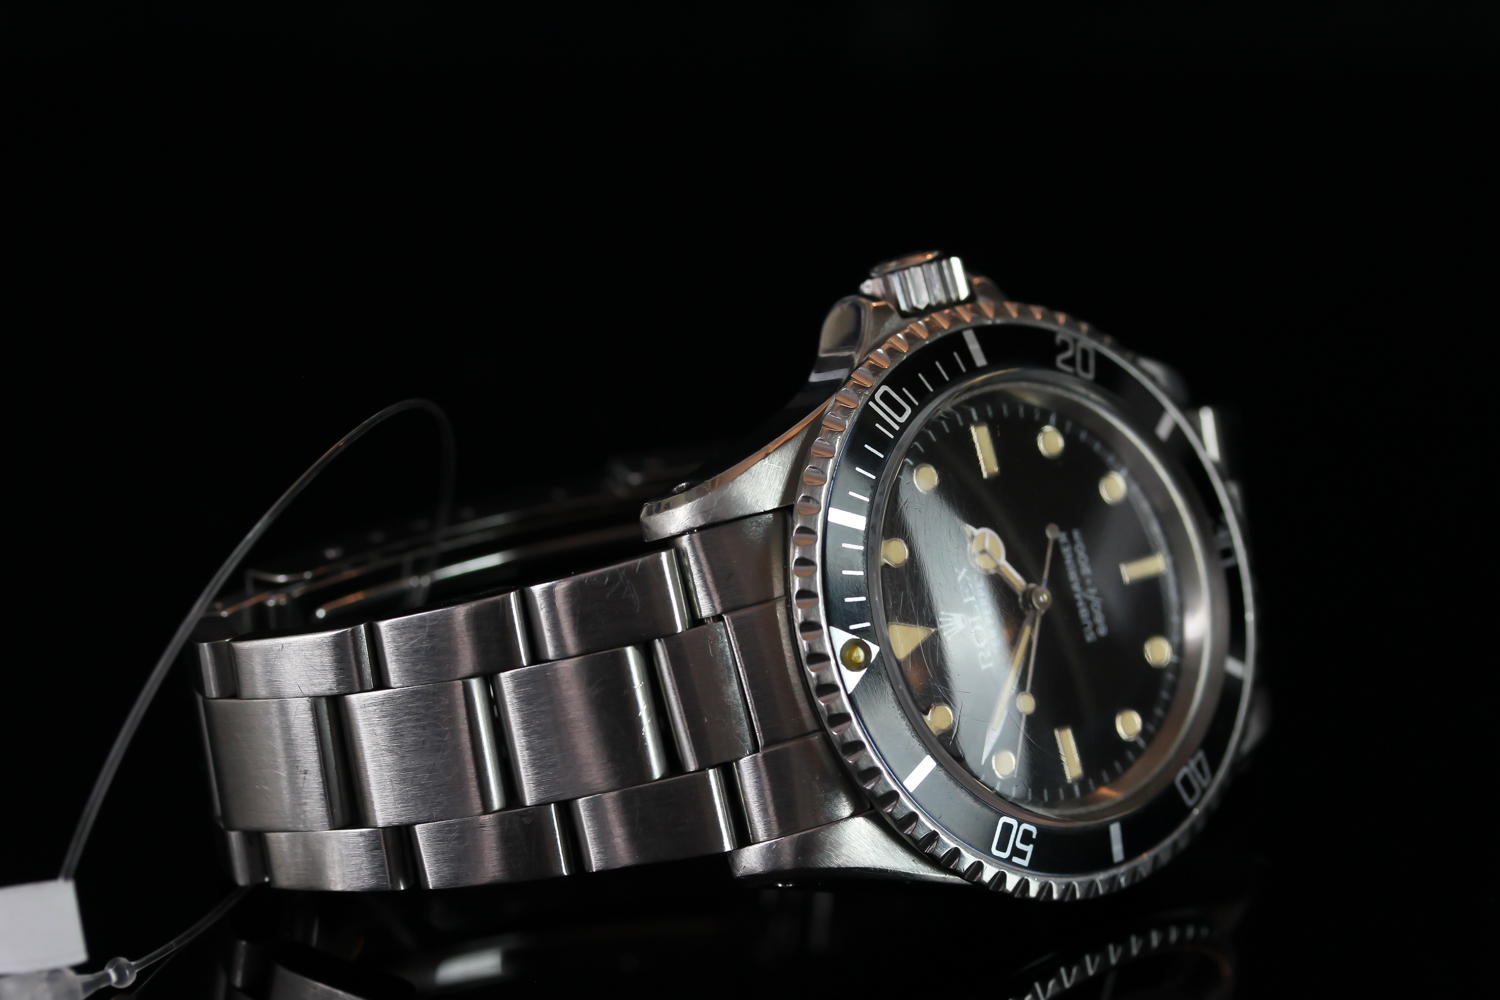 RARE GENTLEMENS ROLEX OYSTER PERPETUAL SUBMARINER 'GLOSS DIAL' WRISTWATCH REF. 5513 W/ SERVICE - Image 3 of 6